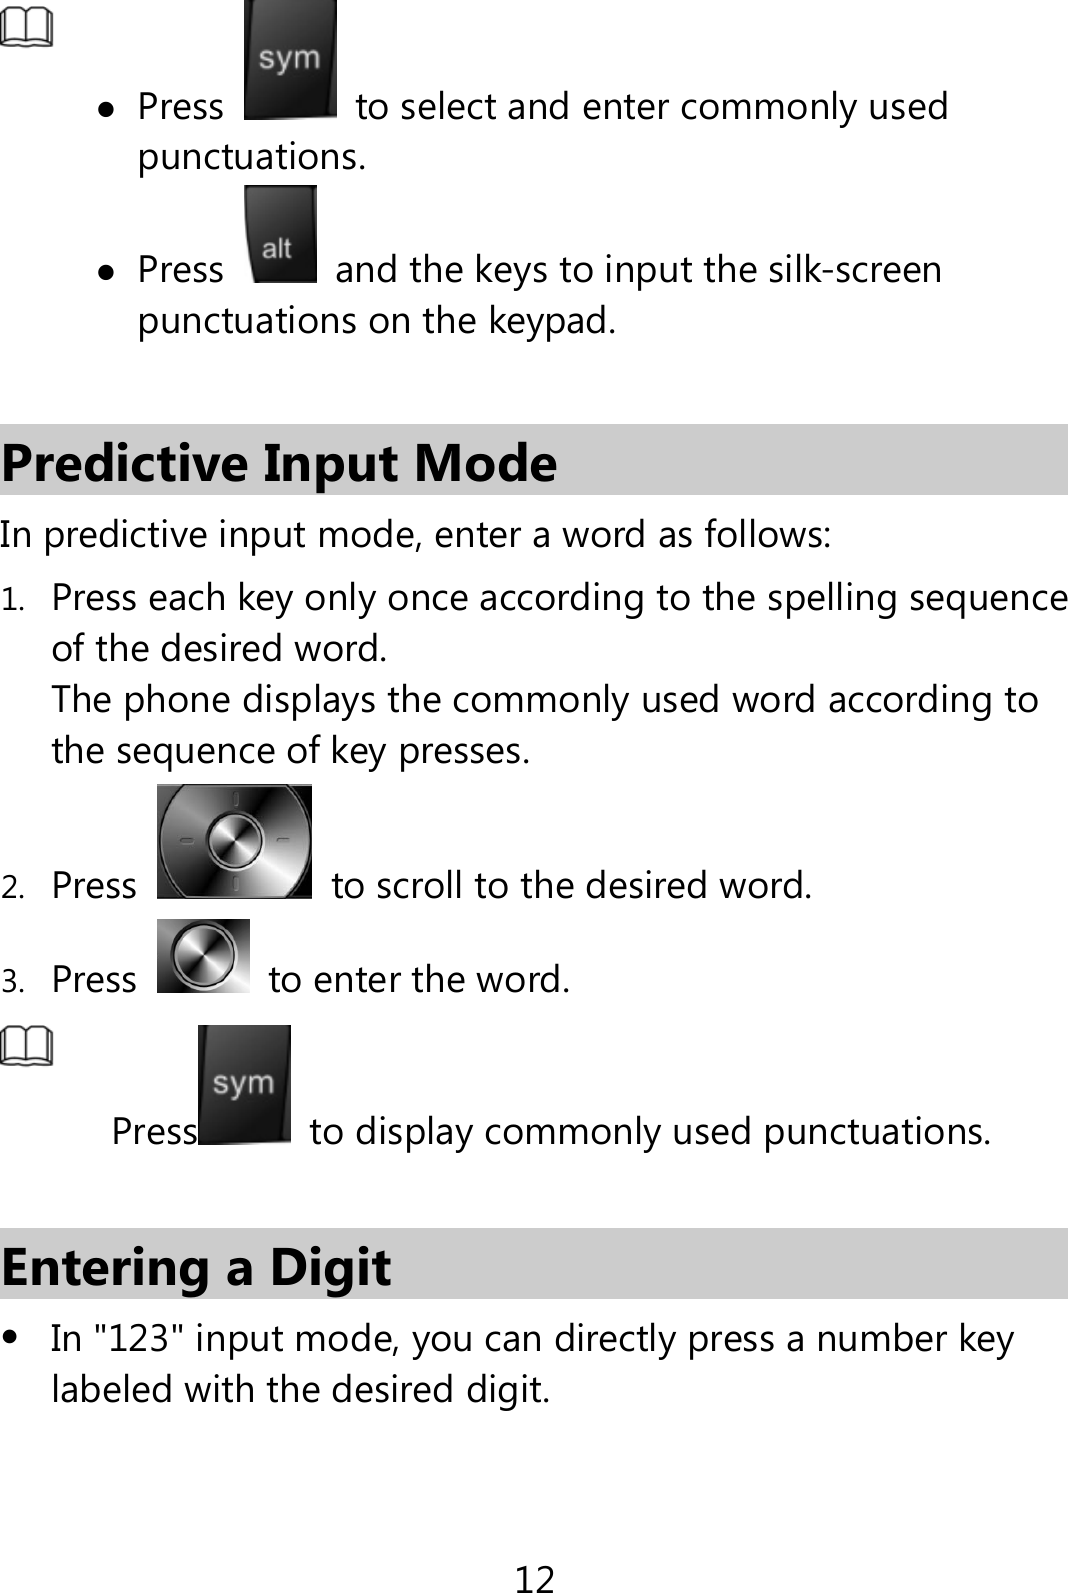 12   Press   to select and enter commonly used punctuations.  Press   and the keys to input the silk-screen punctuations on the keypad.  Predictive Input Mode In predictive input mode, enter a word as follows: 1. Press each key only once according to the spelling sequence of the desired word.   The phone displays the commonly used word according to the sequence of key presses. 2. Press   to scroll to the desired word.   3. Press   to enter the word.  Press   to display commonly used punctuations.  Entering a Digit  In &quot;123&quot; input mode, you can directly press a number key labeled with the desired digit. 